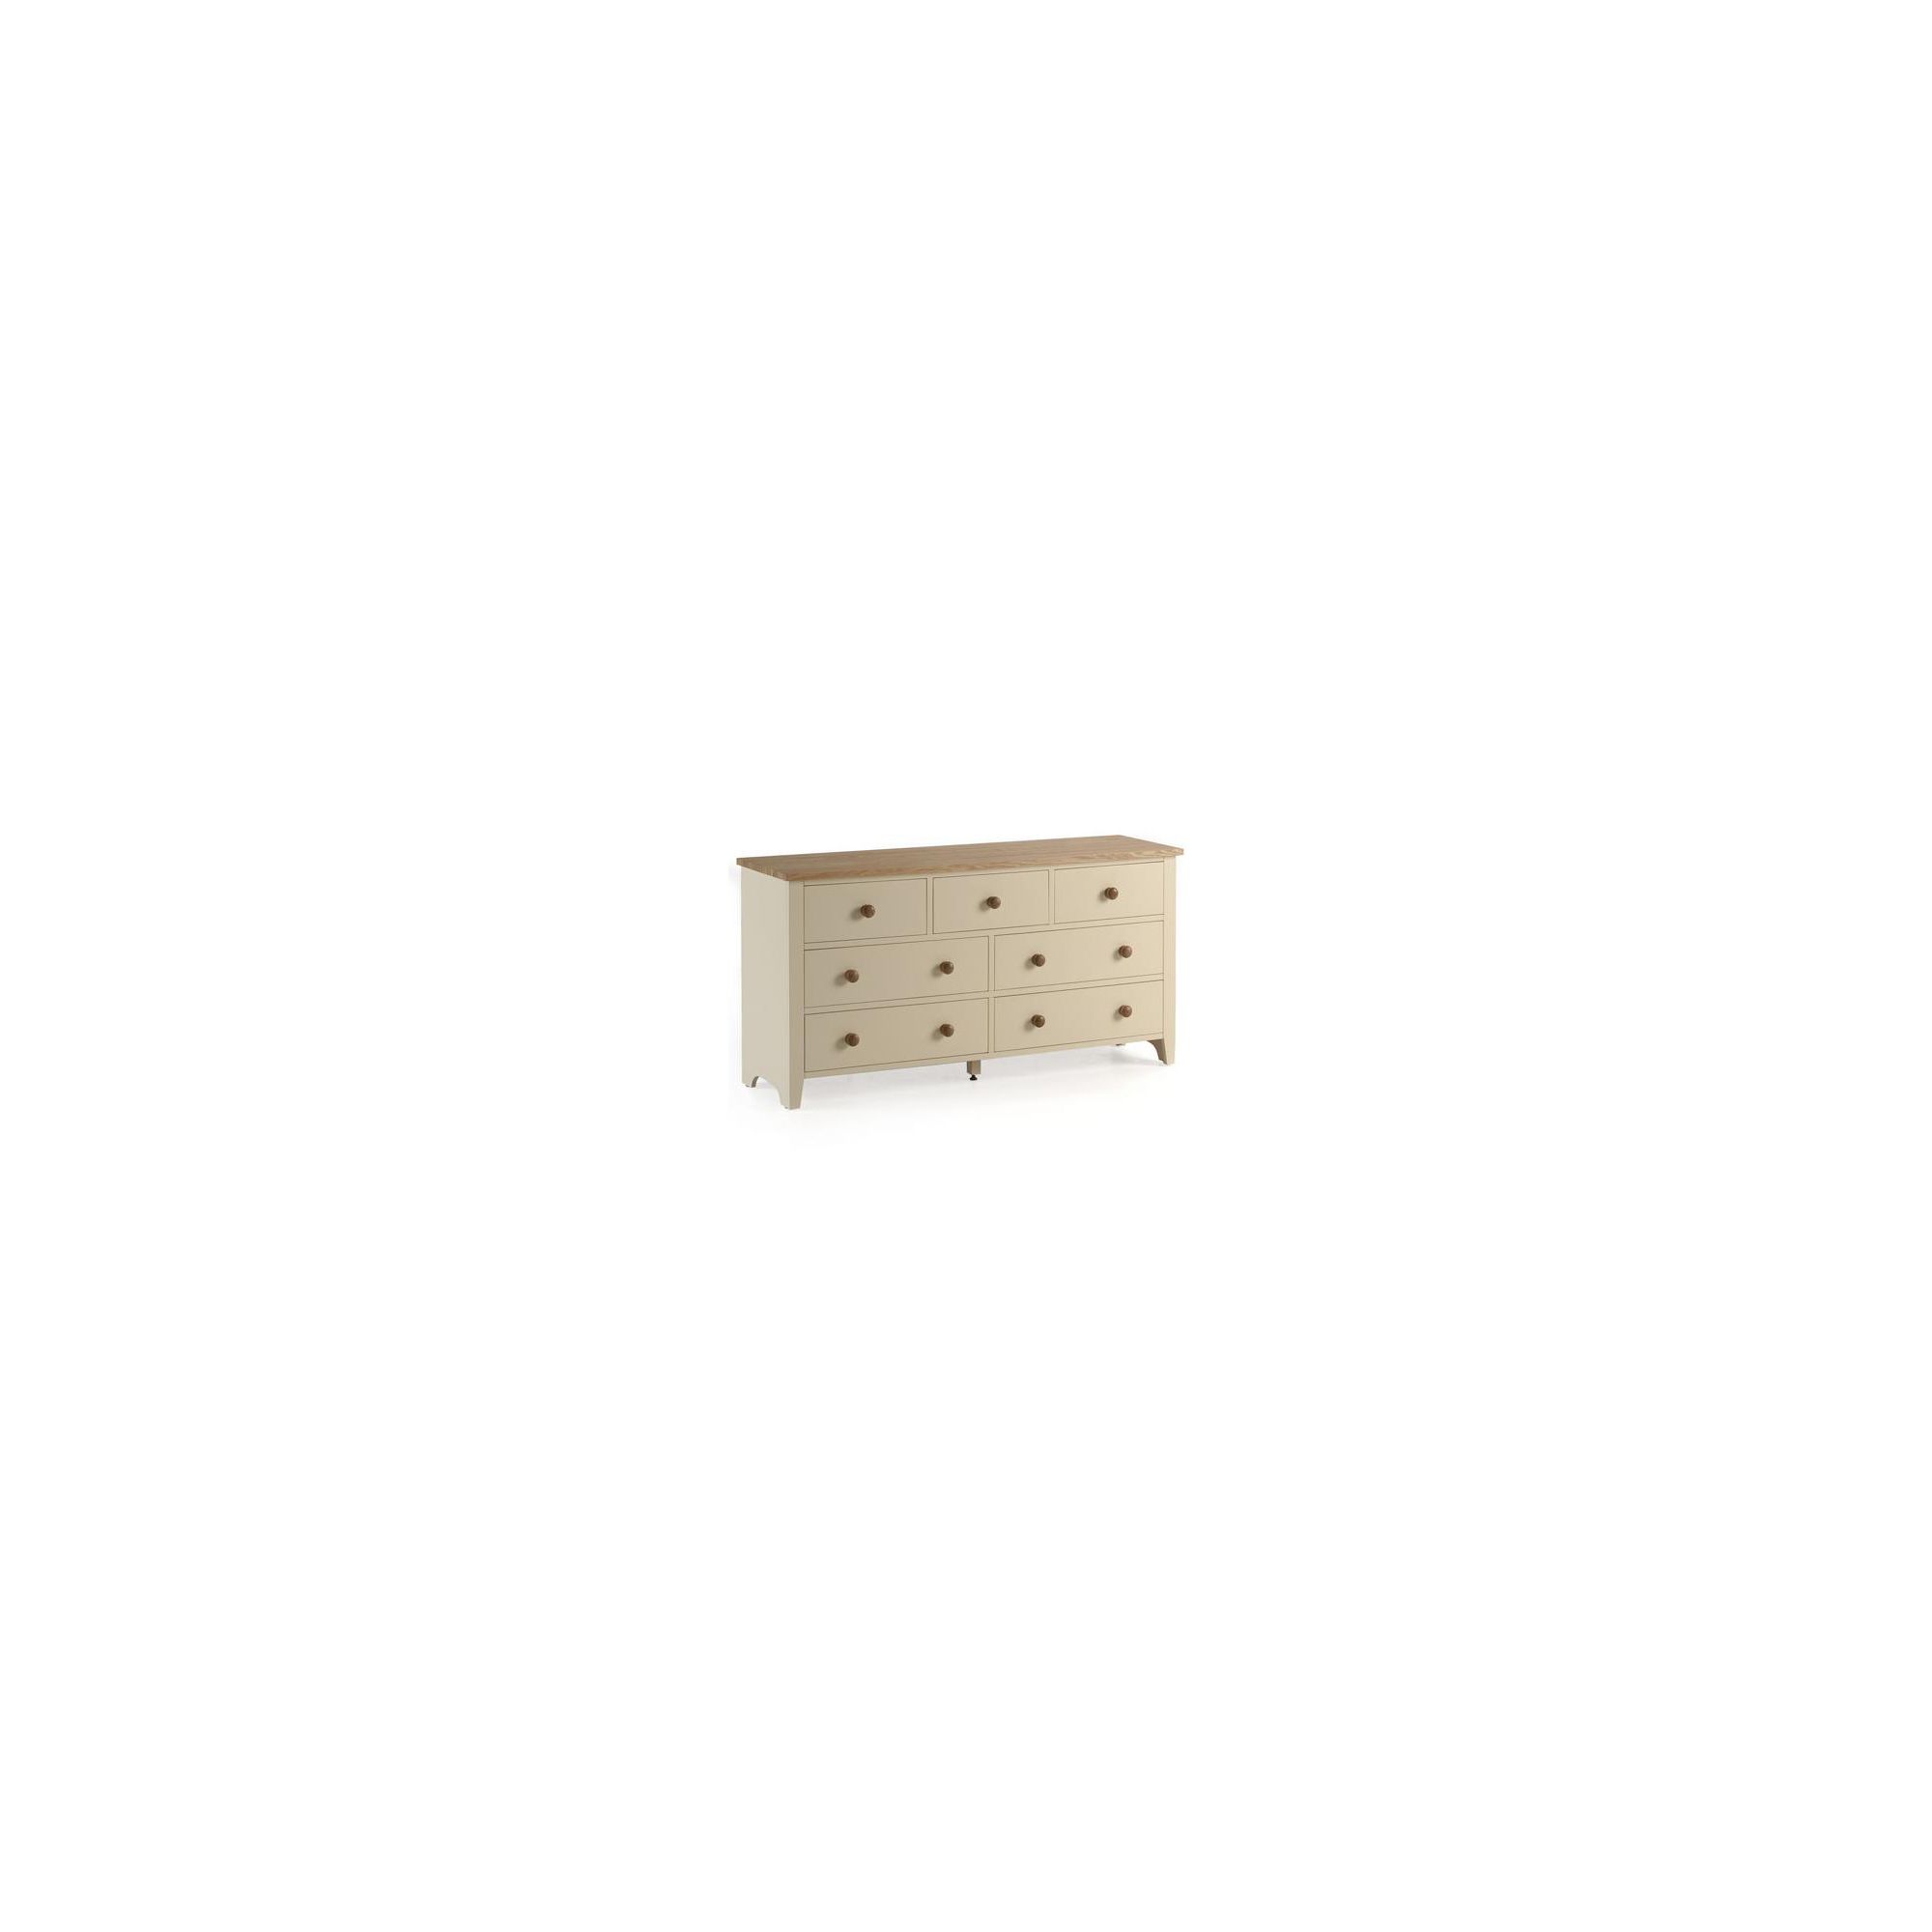 Ametis Camden Painted Pine and Ash Chest in Painted Ivory at Tesco Direct